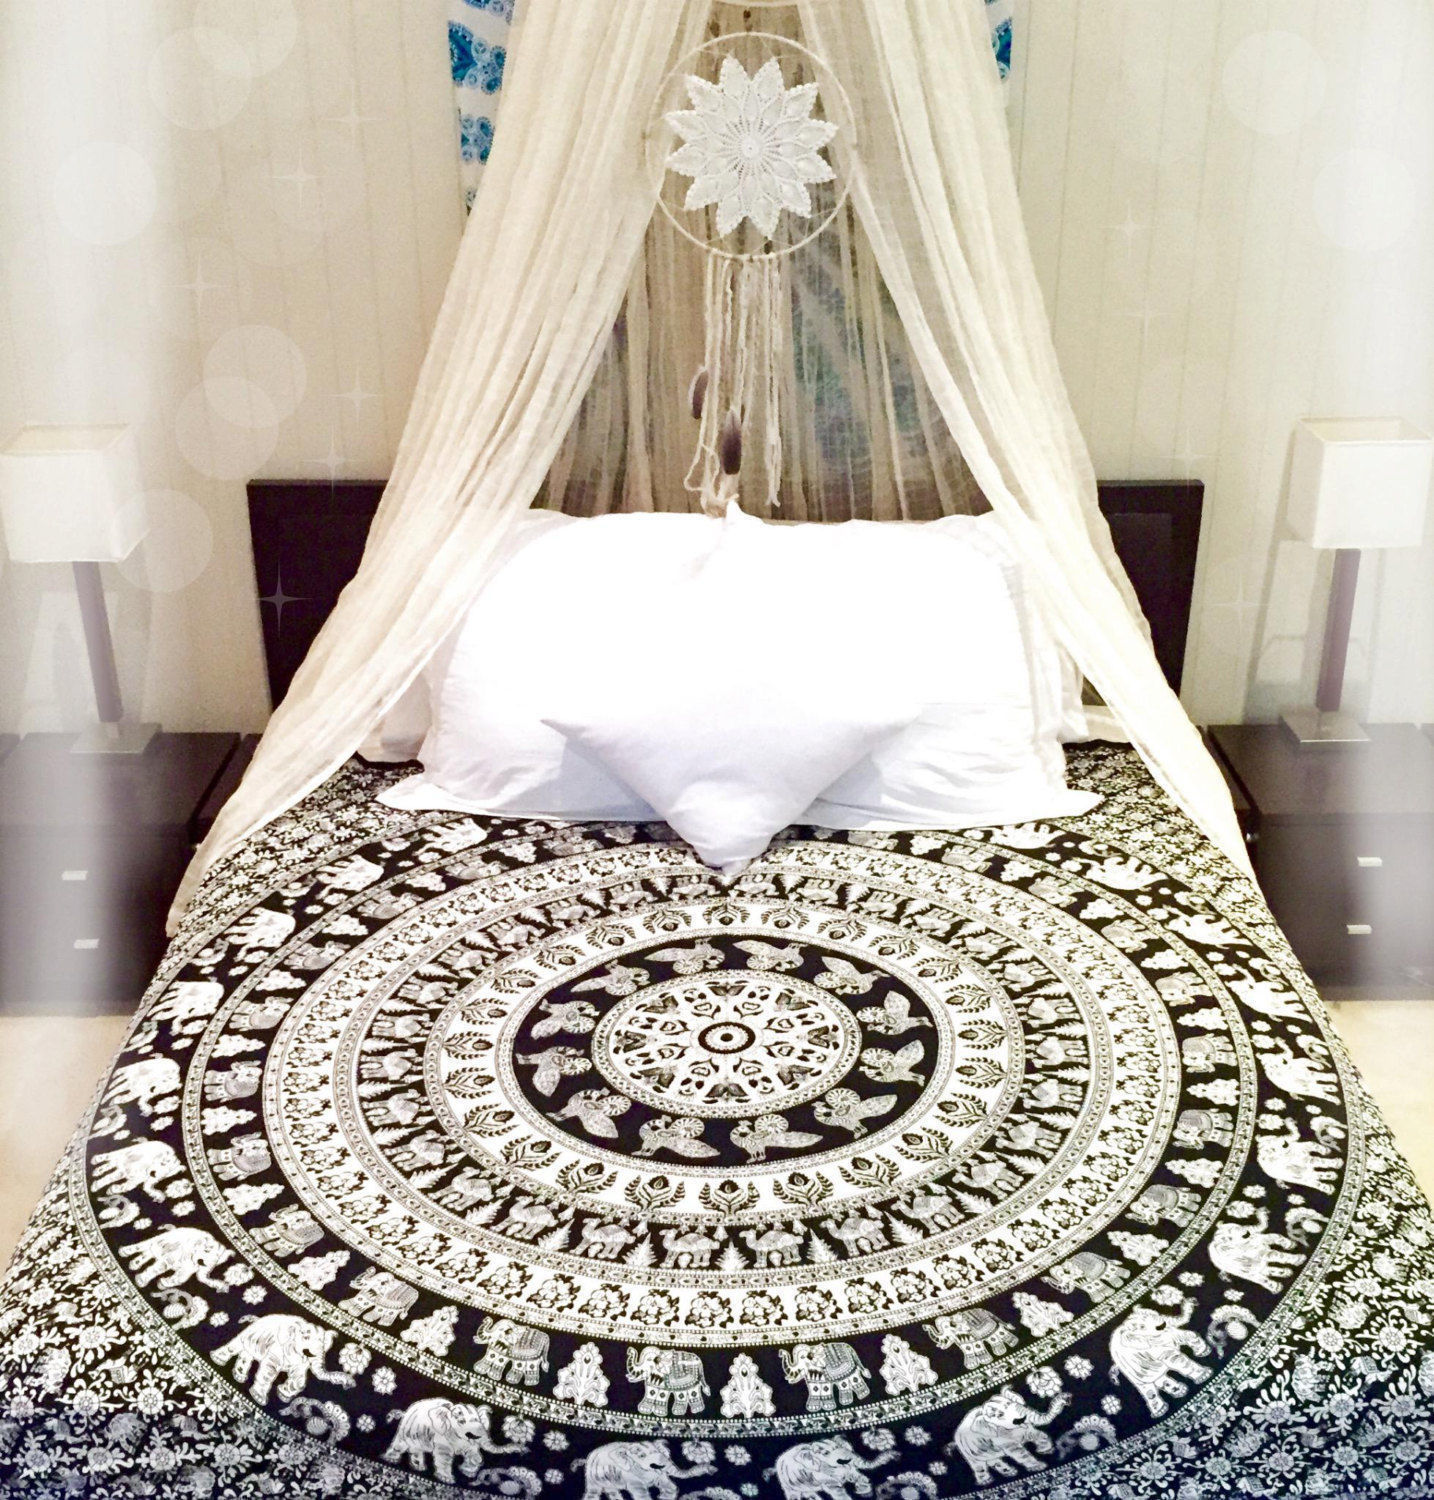 Hippie Indian Tapestry Elephant Mandala Throw Wall Hanging Bed Sheet Bedspread 